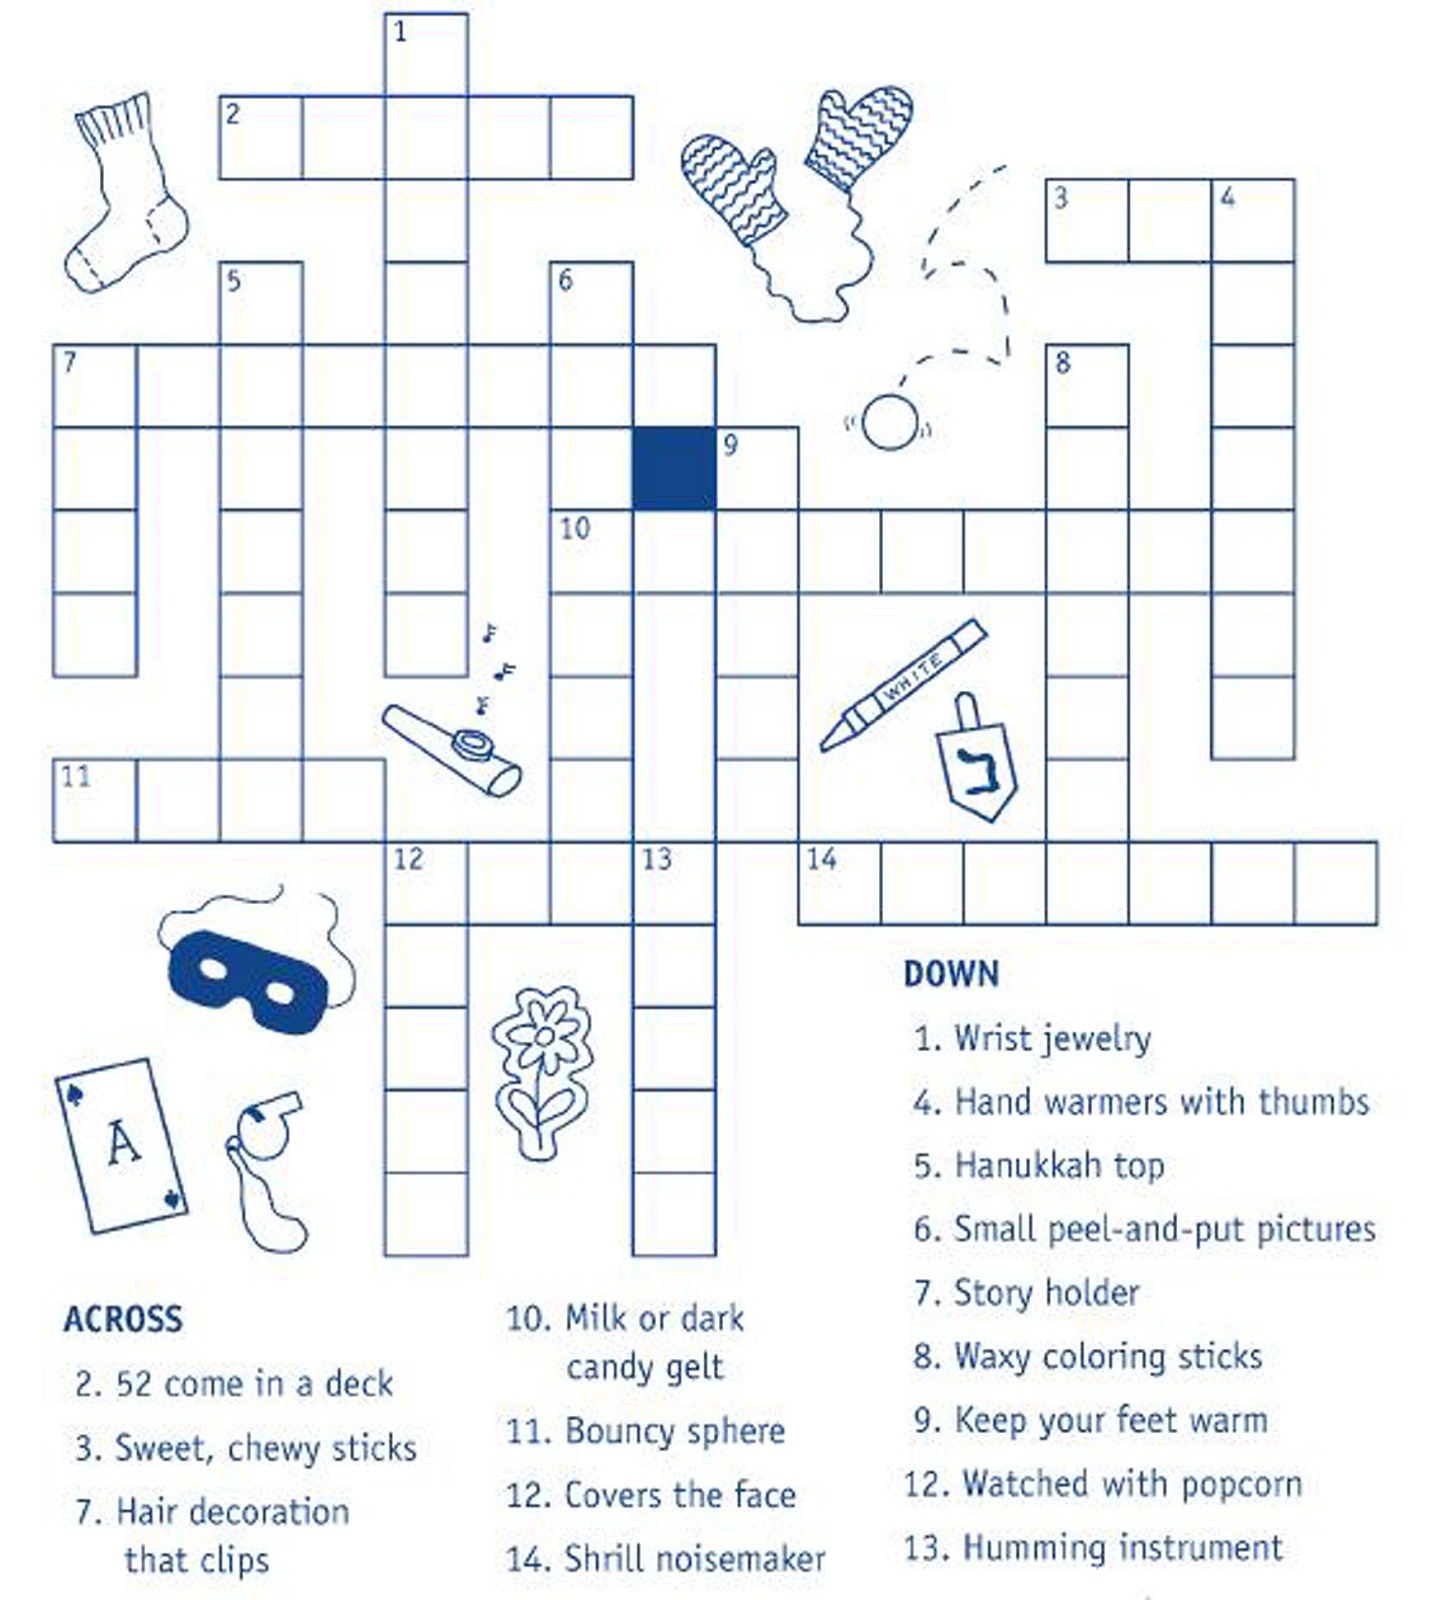 kids-crossword-puzzles-to-print-activity-shelter